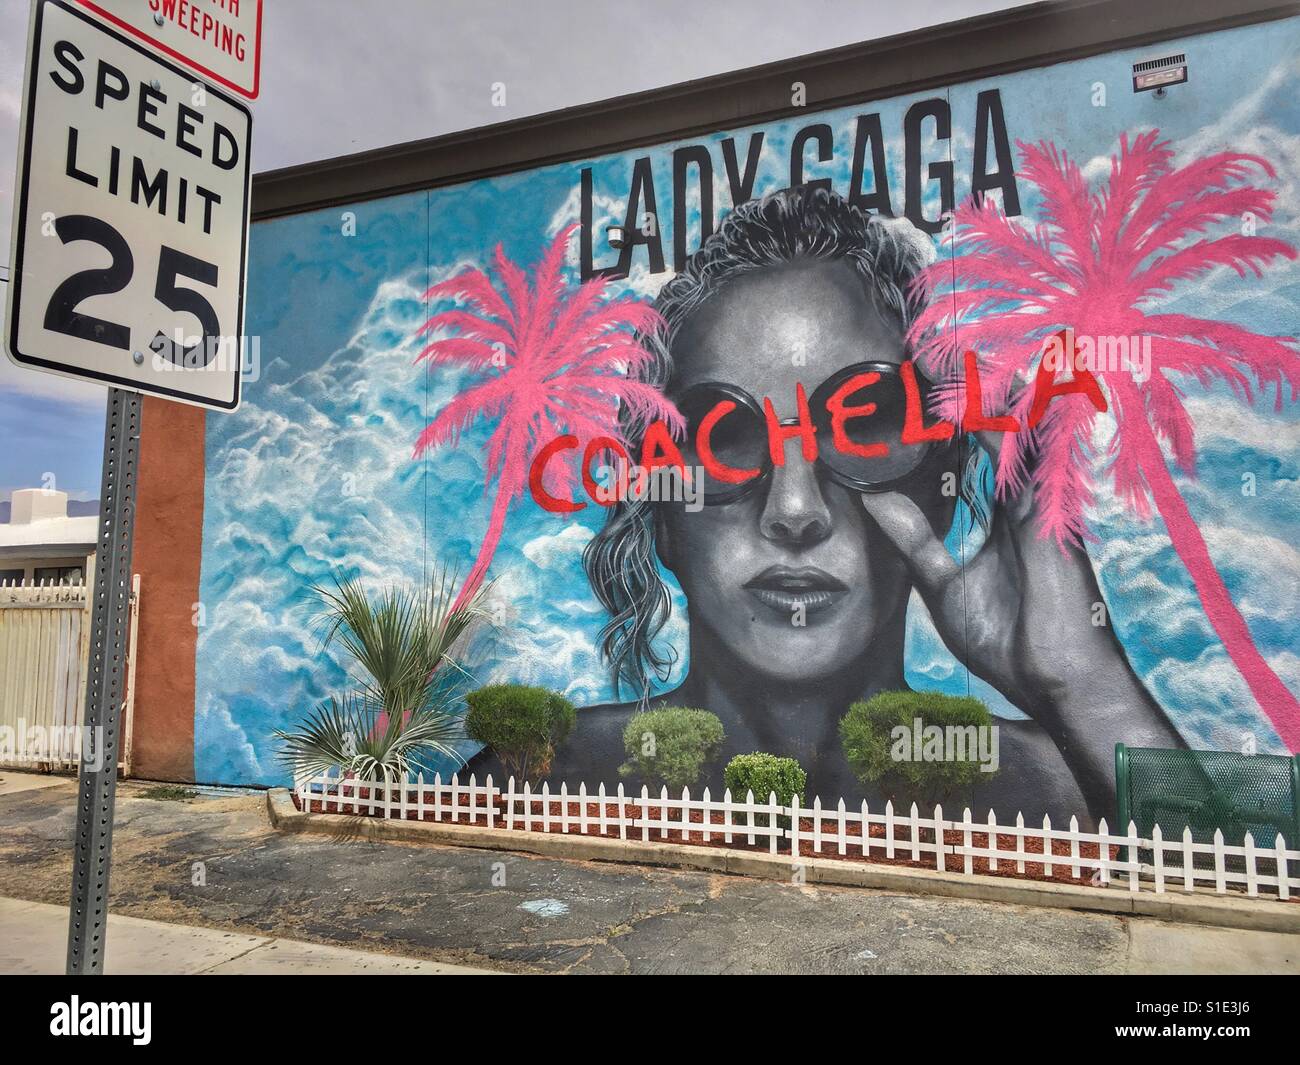 lady-gaga-mural-painted-on-the-side-of-a